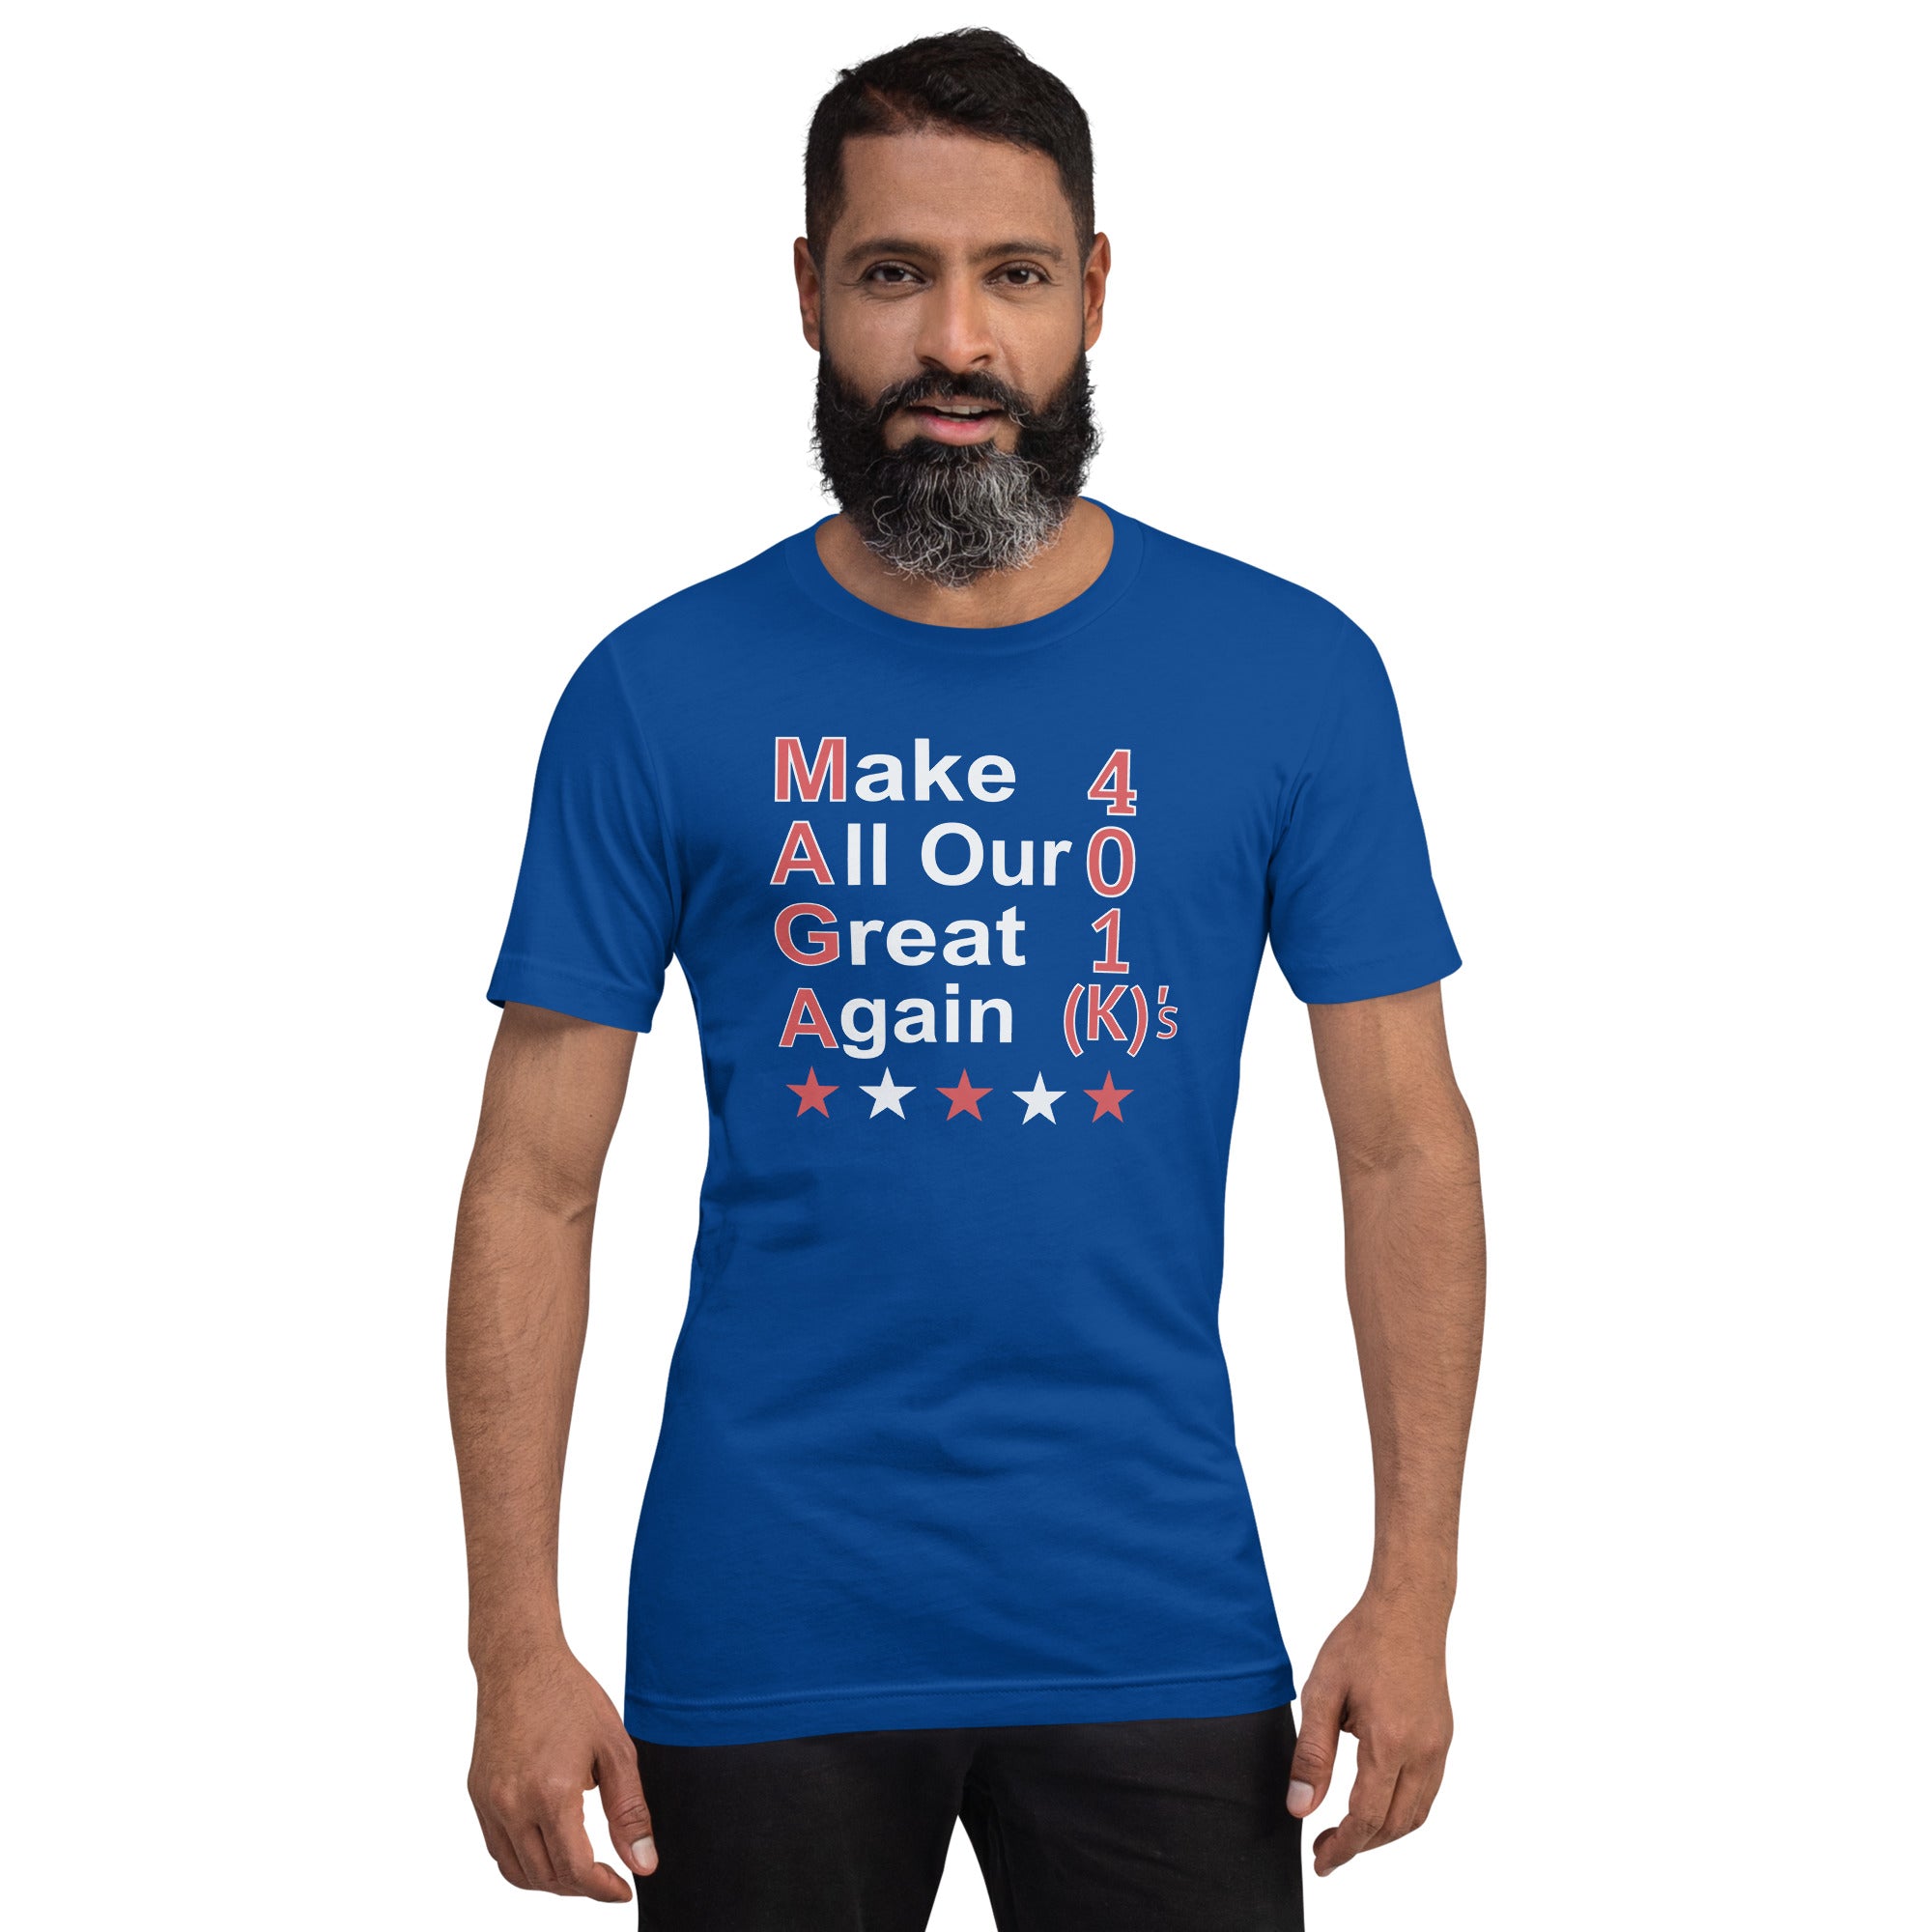 MAGA Make All Our 401k's Great Again T-Shirt For Trump Republican Supporters